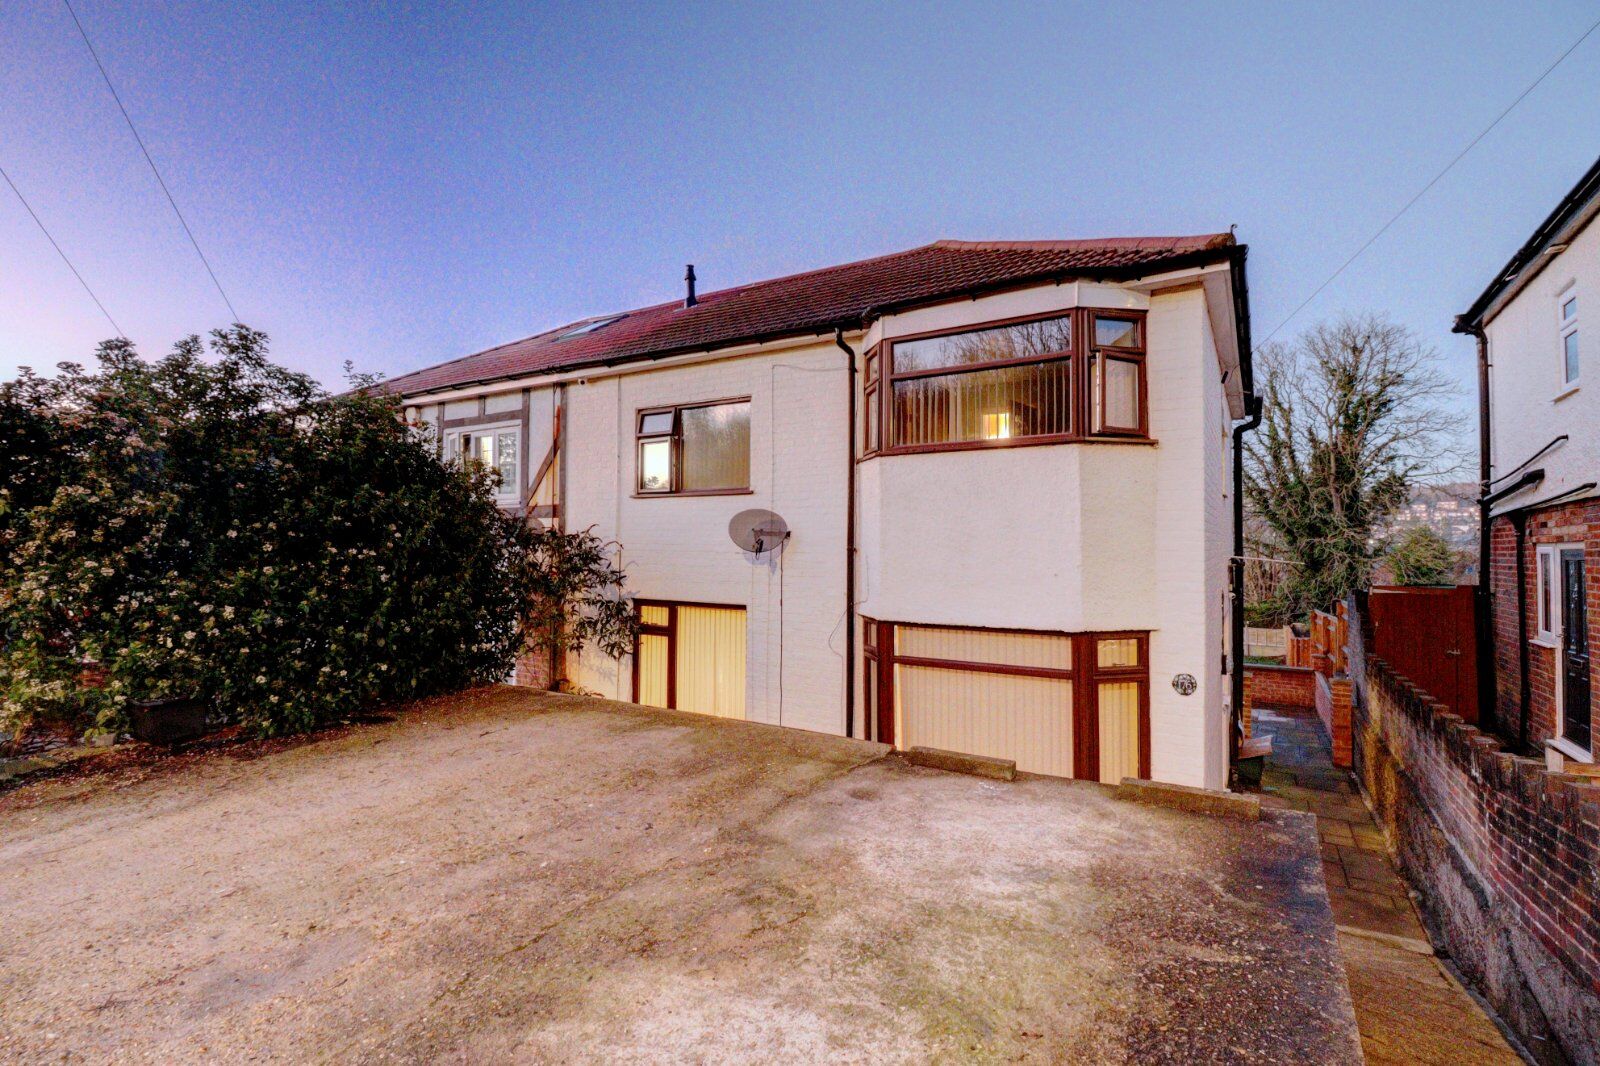 3 bedroom semi detached house for sale Dashwood Avenue, High Wycombe, HP12, main image